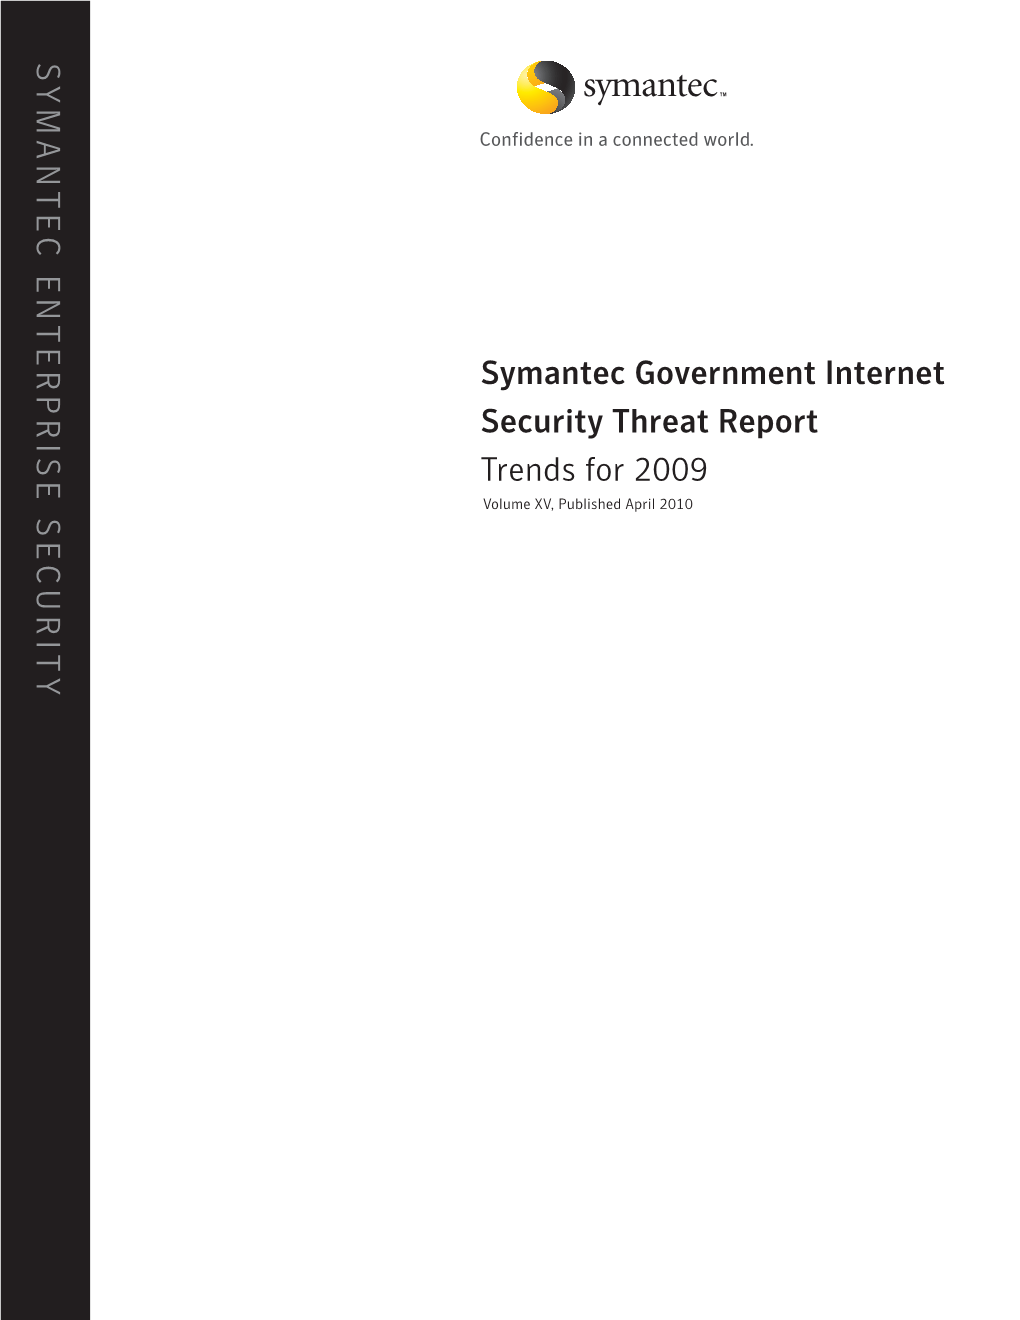 Symantec Government Internet Security Threat Report Trends for 2009